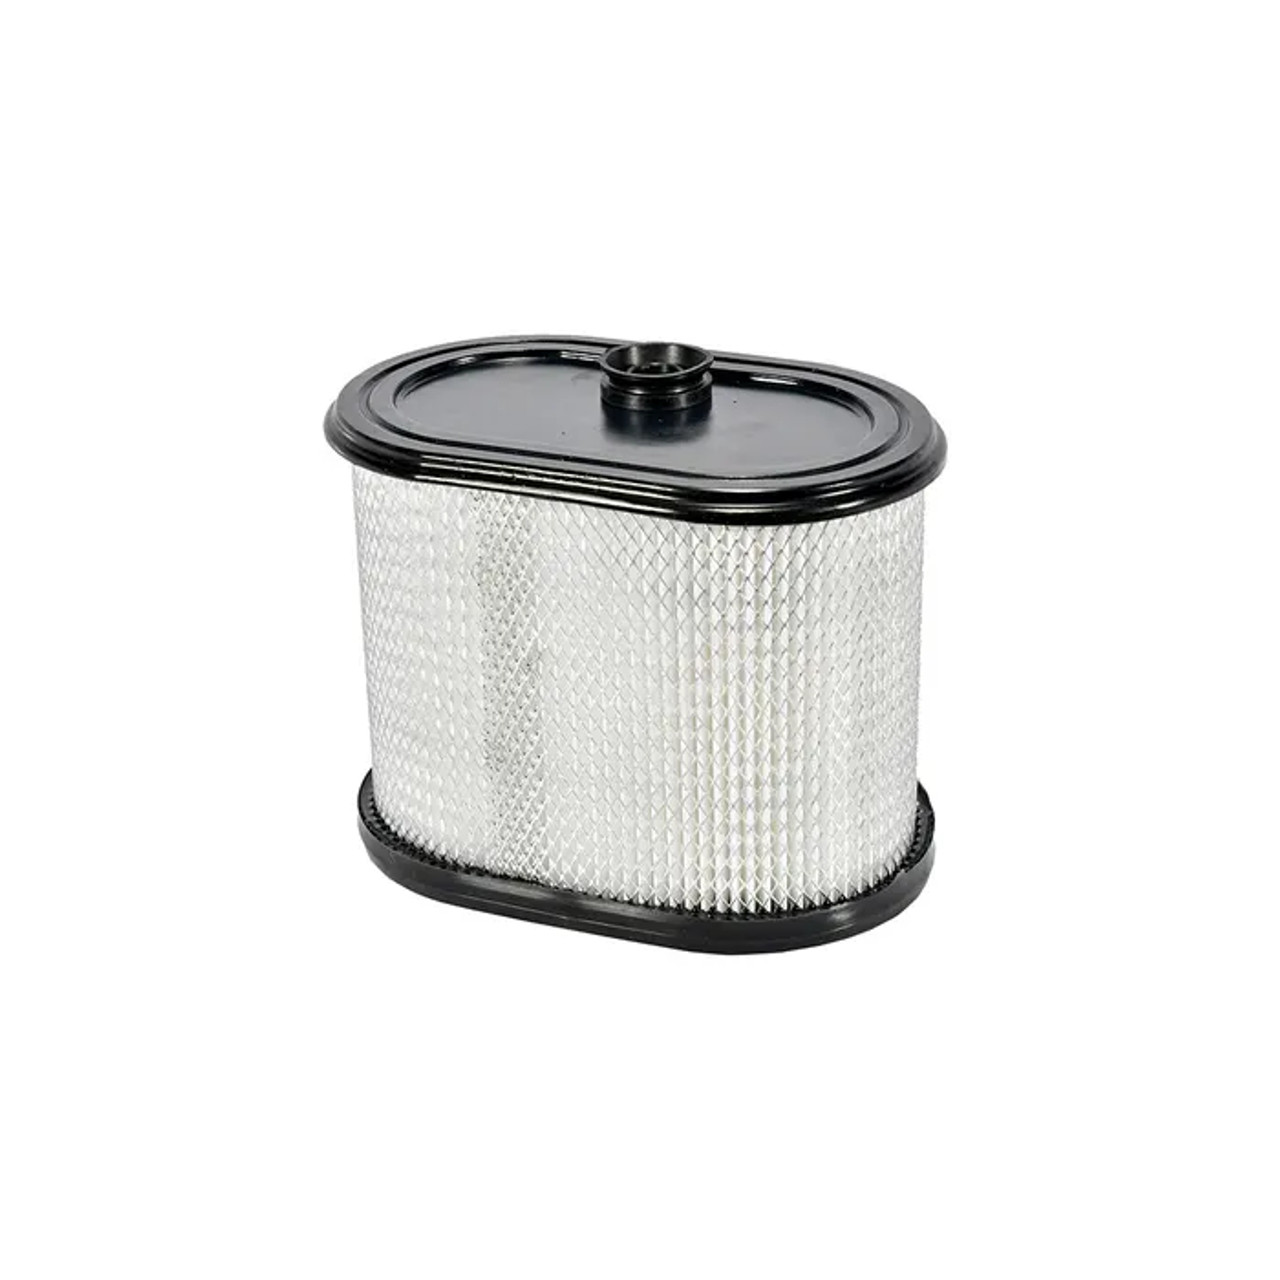 AIR FILTER FOR BRIGGS & STRATTON